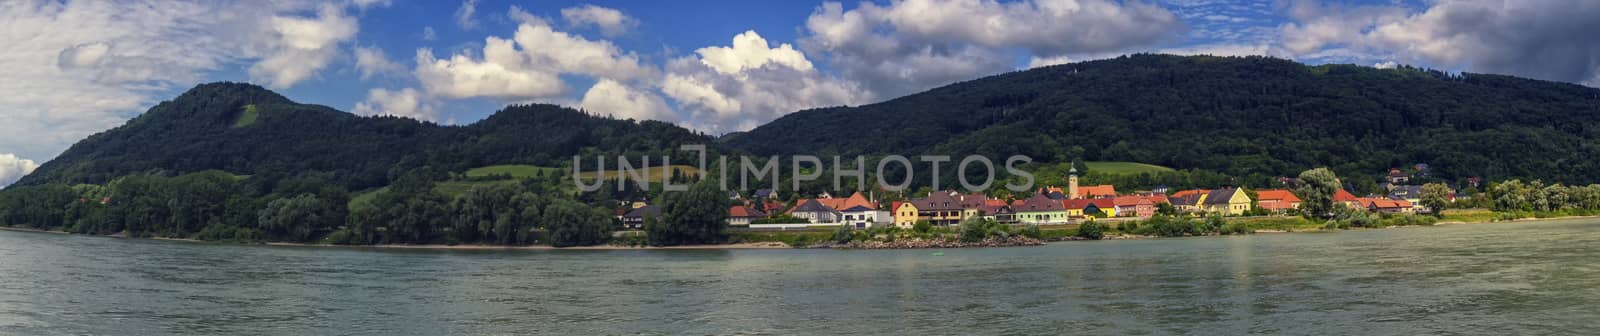 Panoramic view on the village of Willendorf on the river Danube in the Wachau region by day, Austria